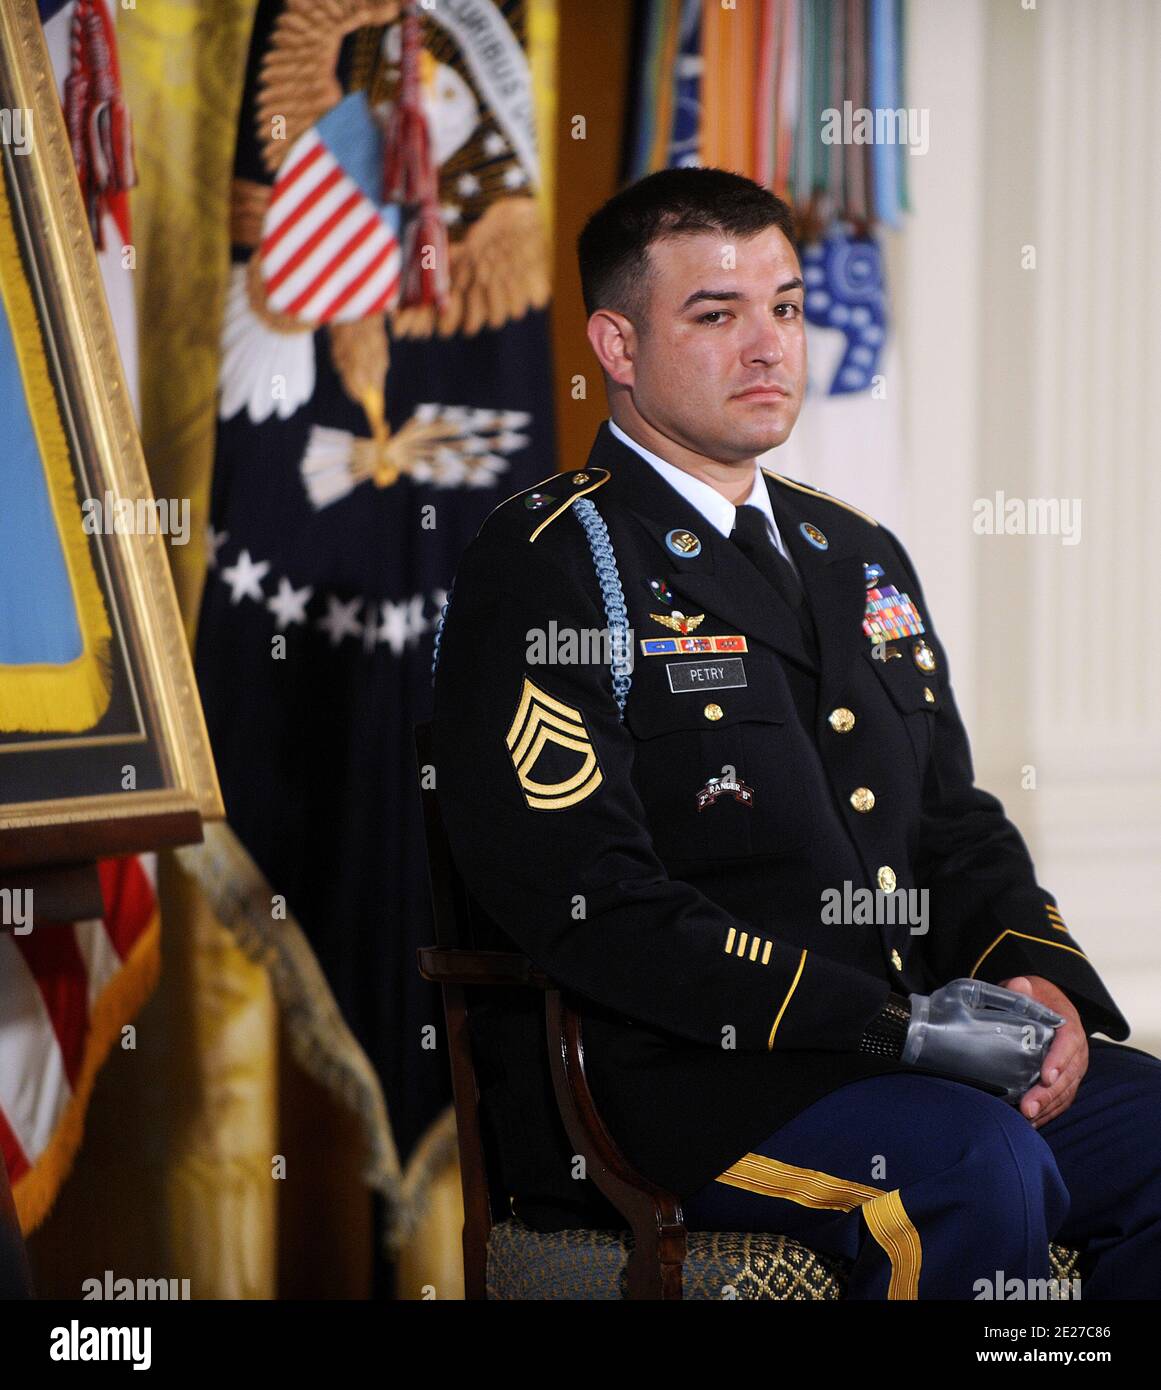 Sergeant First Class Leroy A. Petry, Medal of Honor Recipient